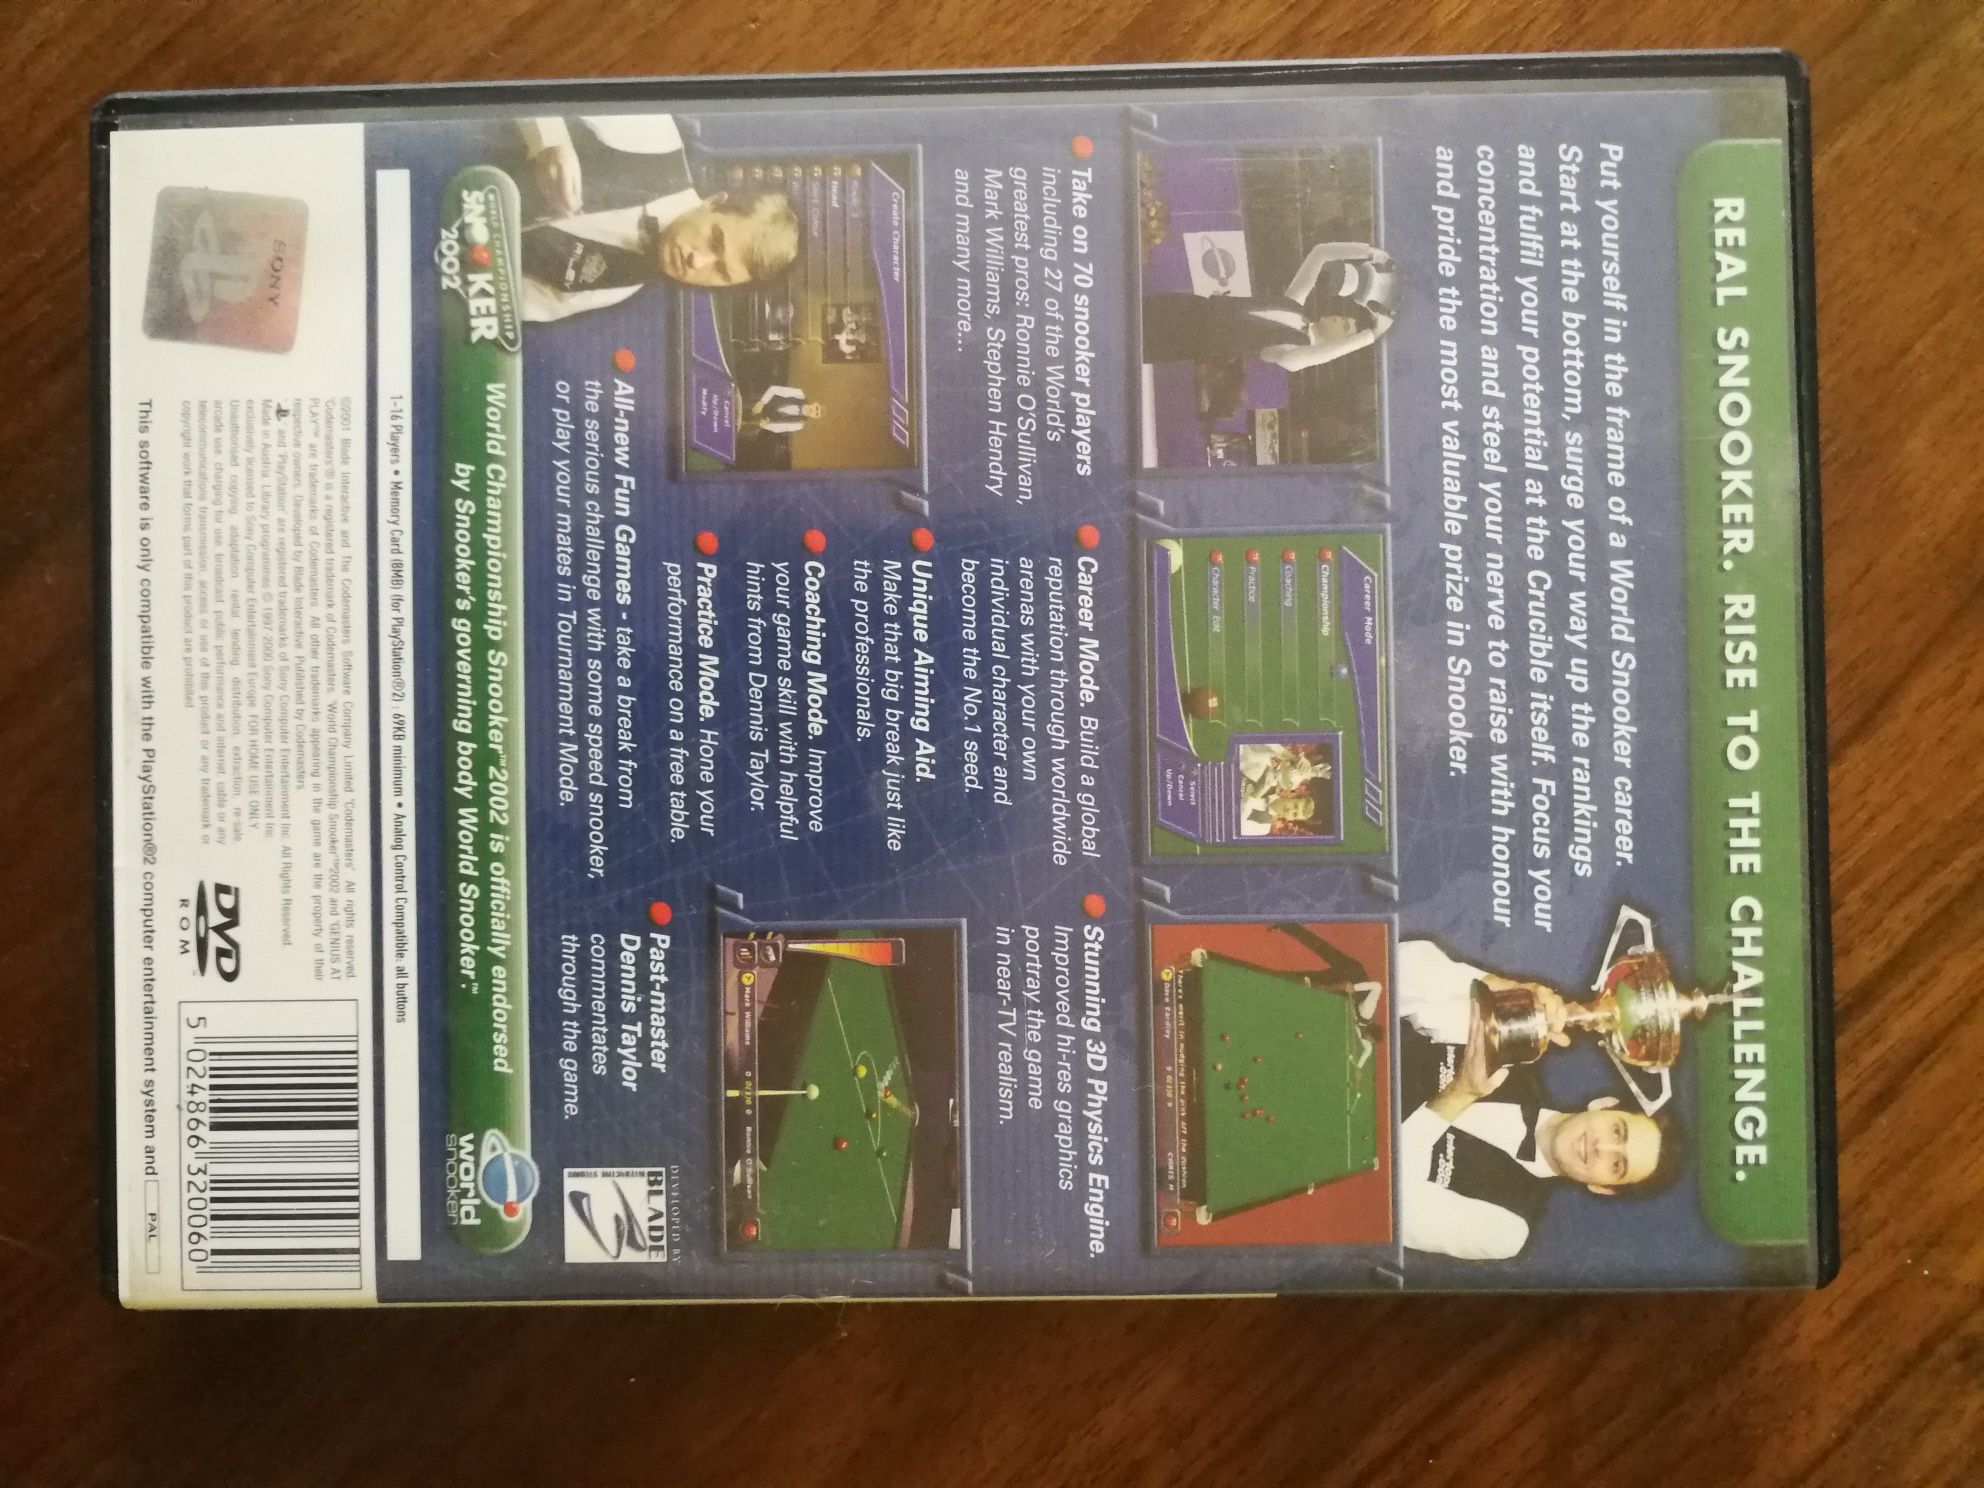 Snooker 2002 PS2